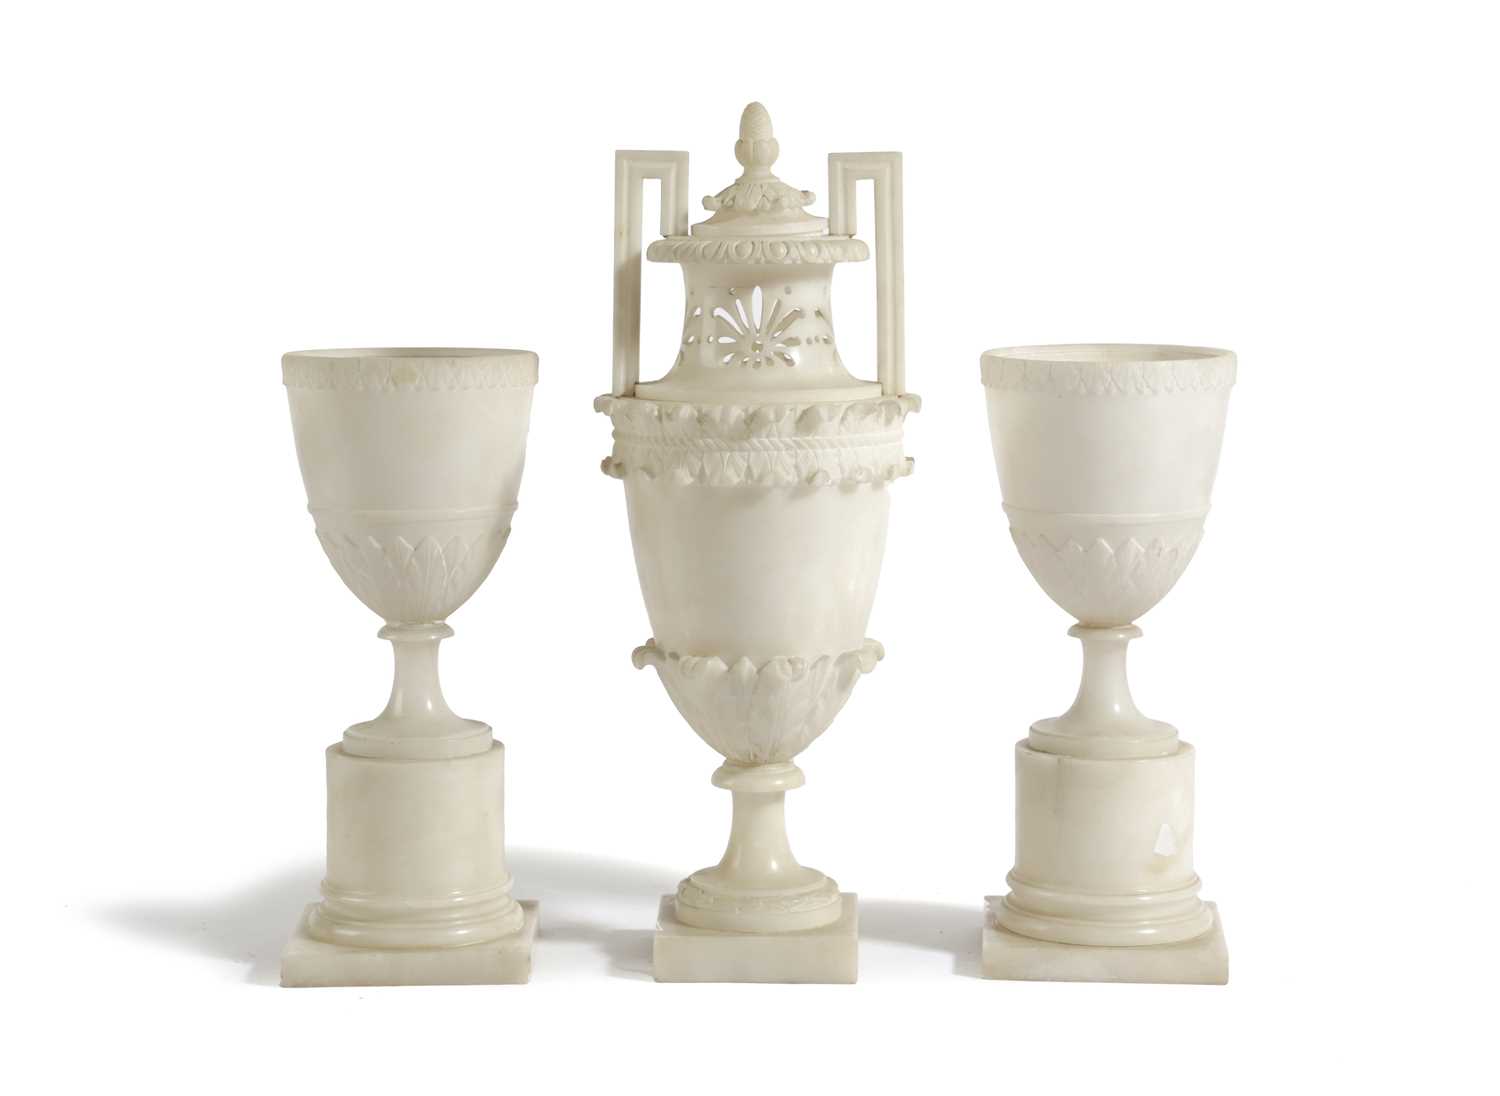 A PAIR OF ITALIAN ALABASTER GRAND TOUR URNS LATE 19TH / EARLY 20TH CENTURY the tapering bodies